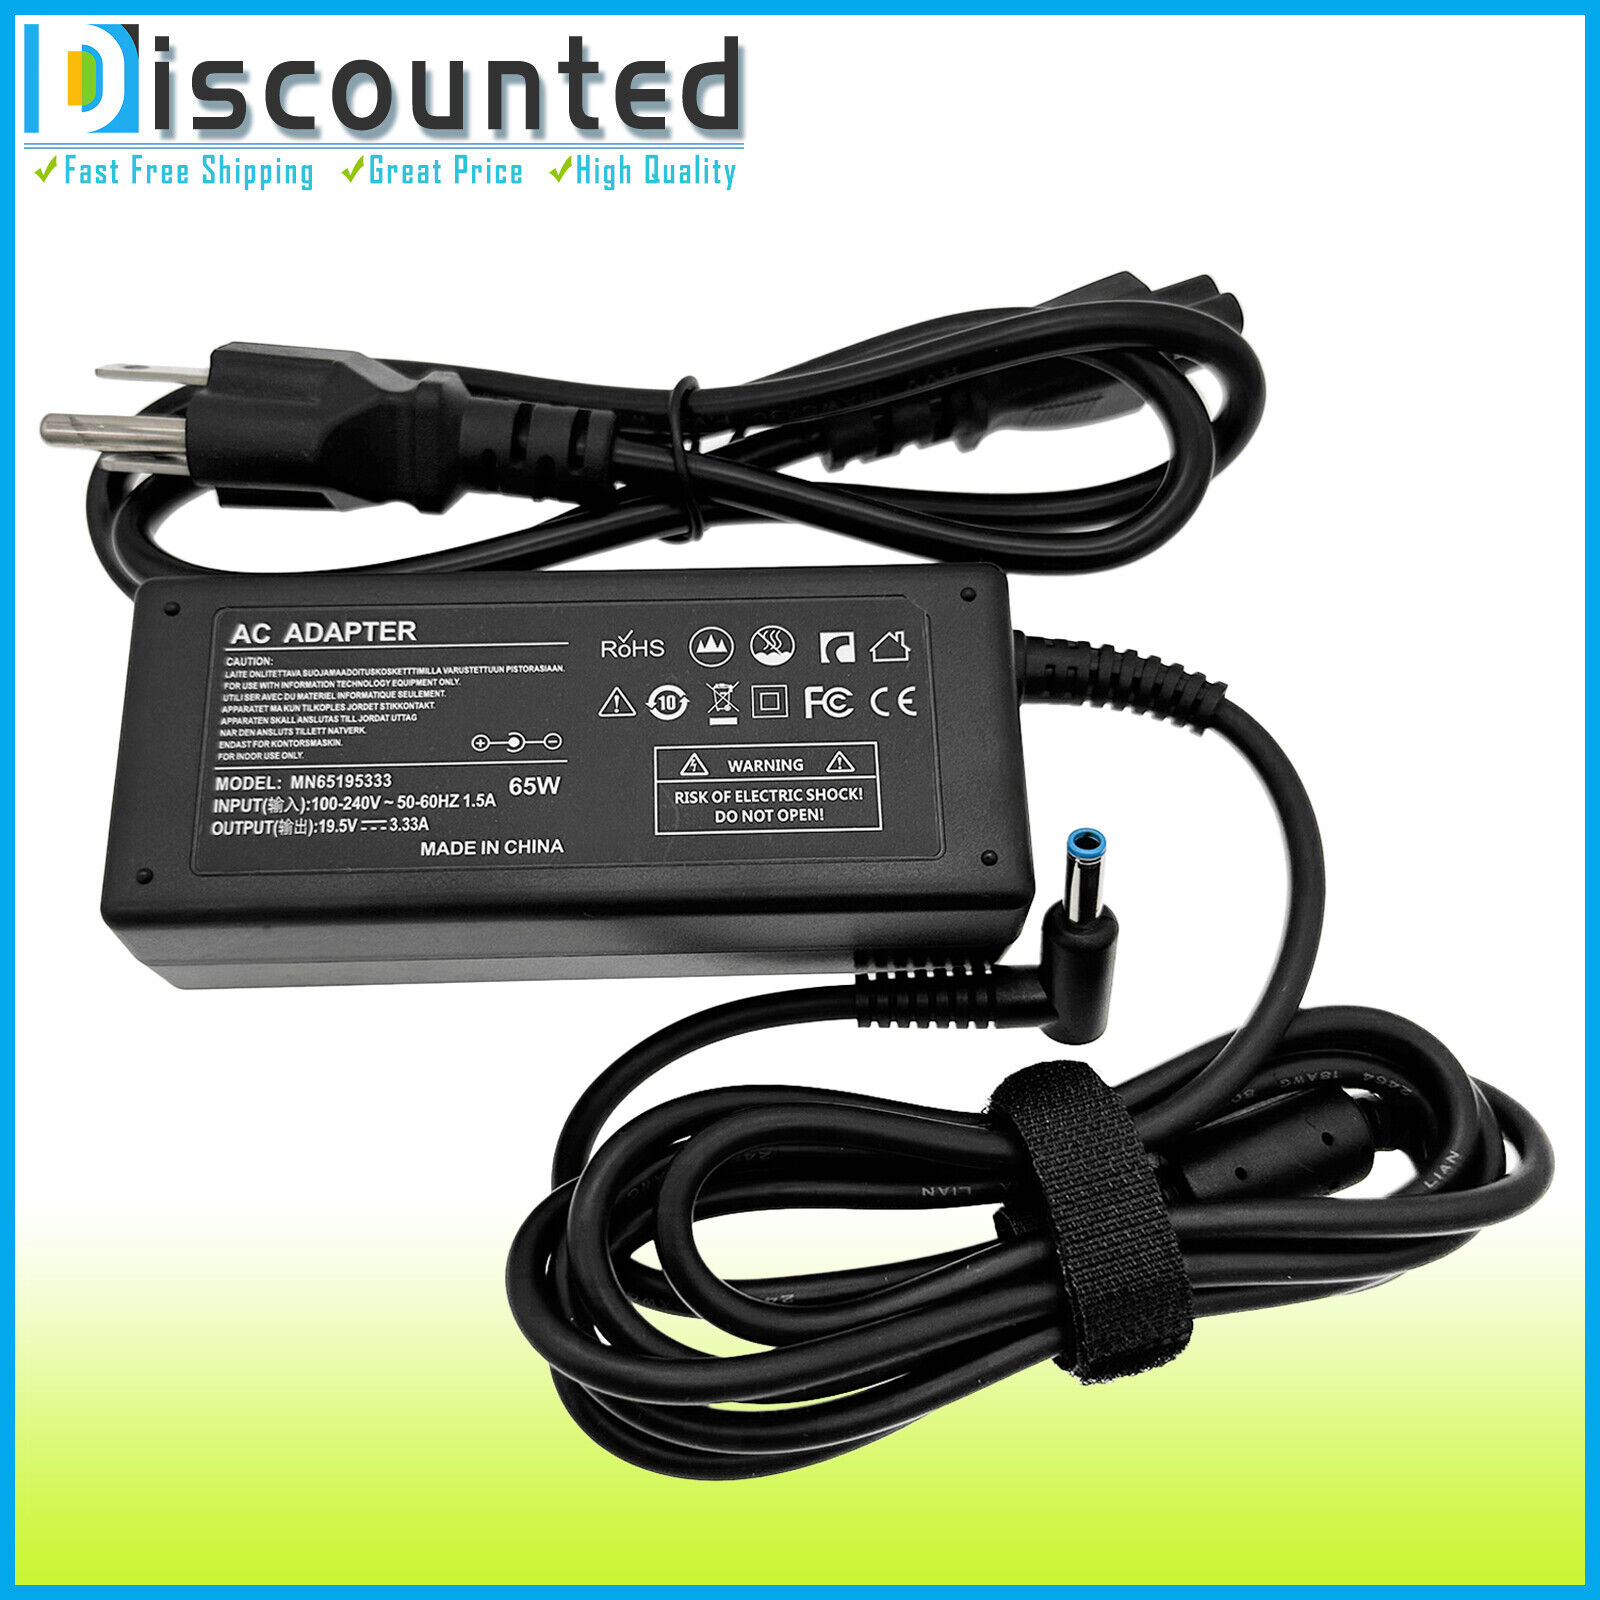 AC Adapter For HP 14-fq0046nr 14-fq0050nr 14-fq0057nr Laptop Charger Power Cord